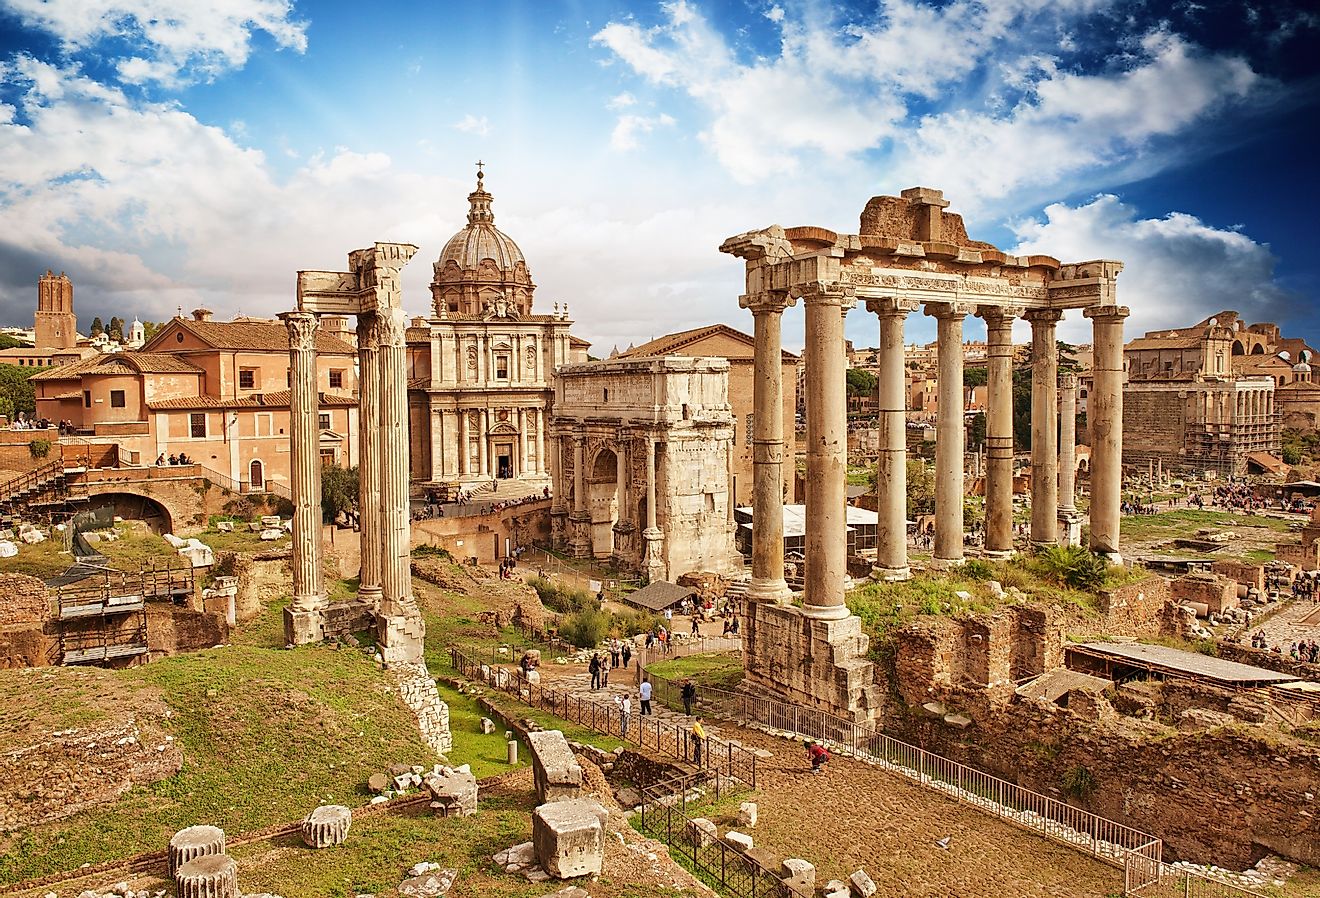 Overlooking the Ancient Ruins of Rome, Imperial Forum, Italy.